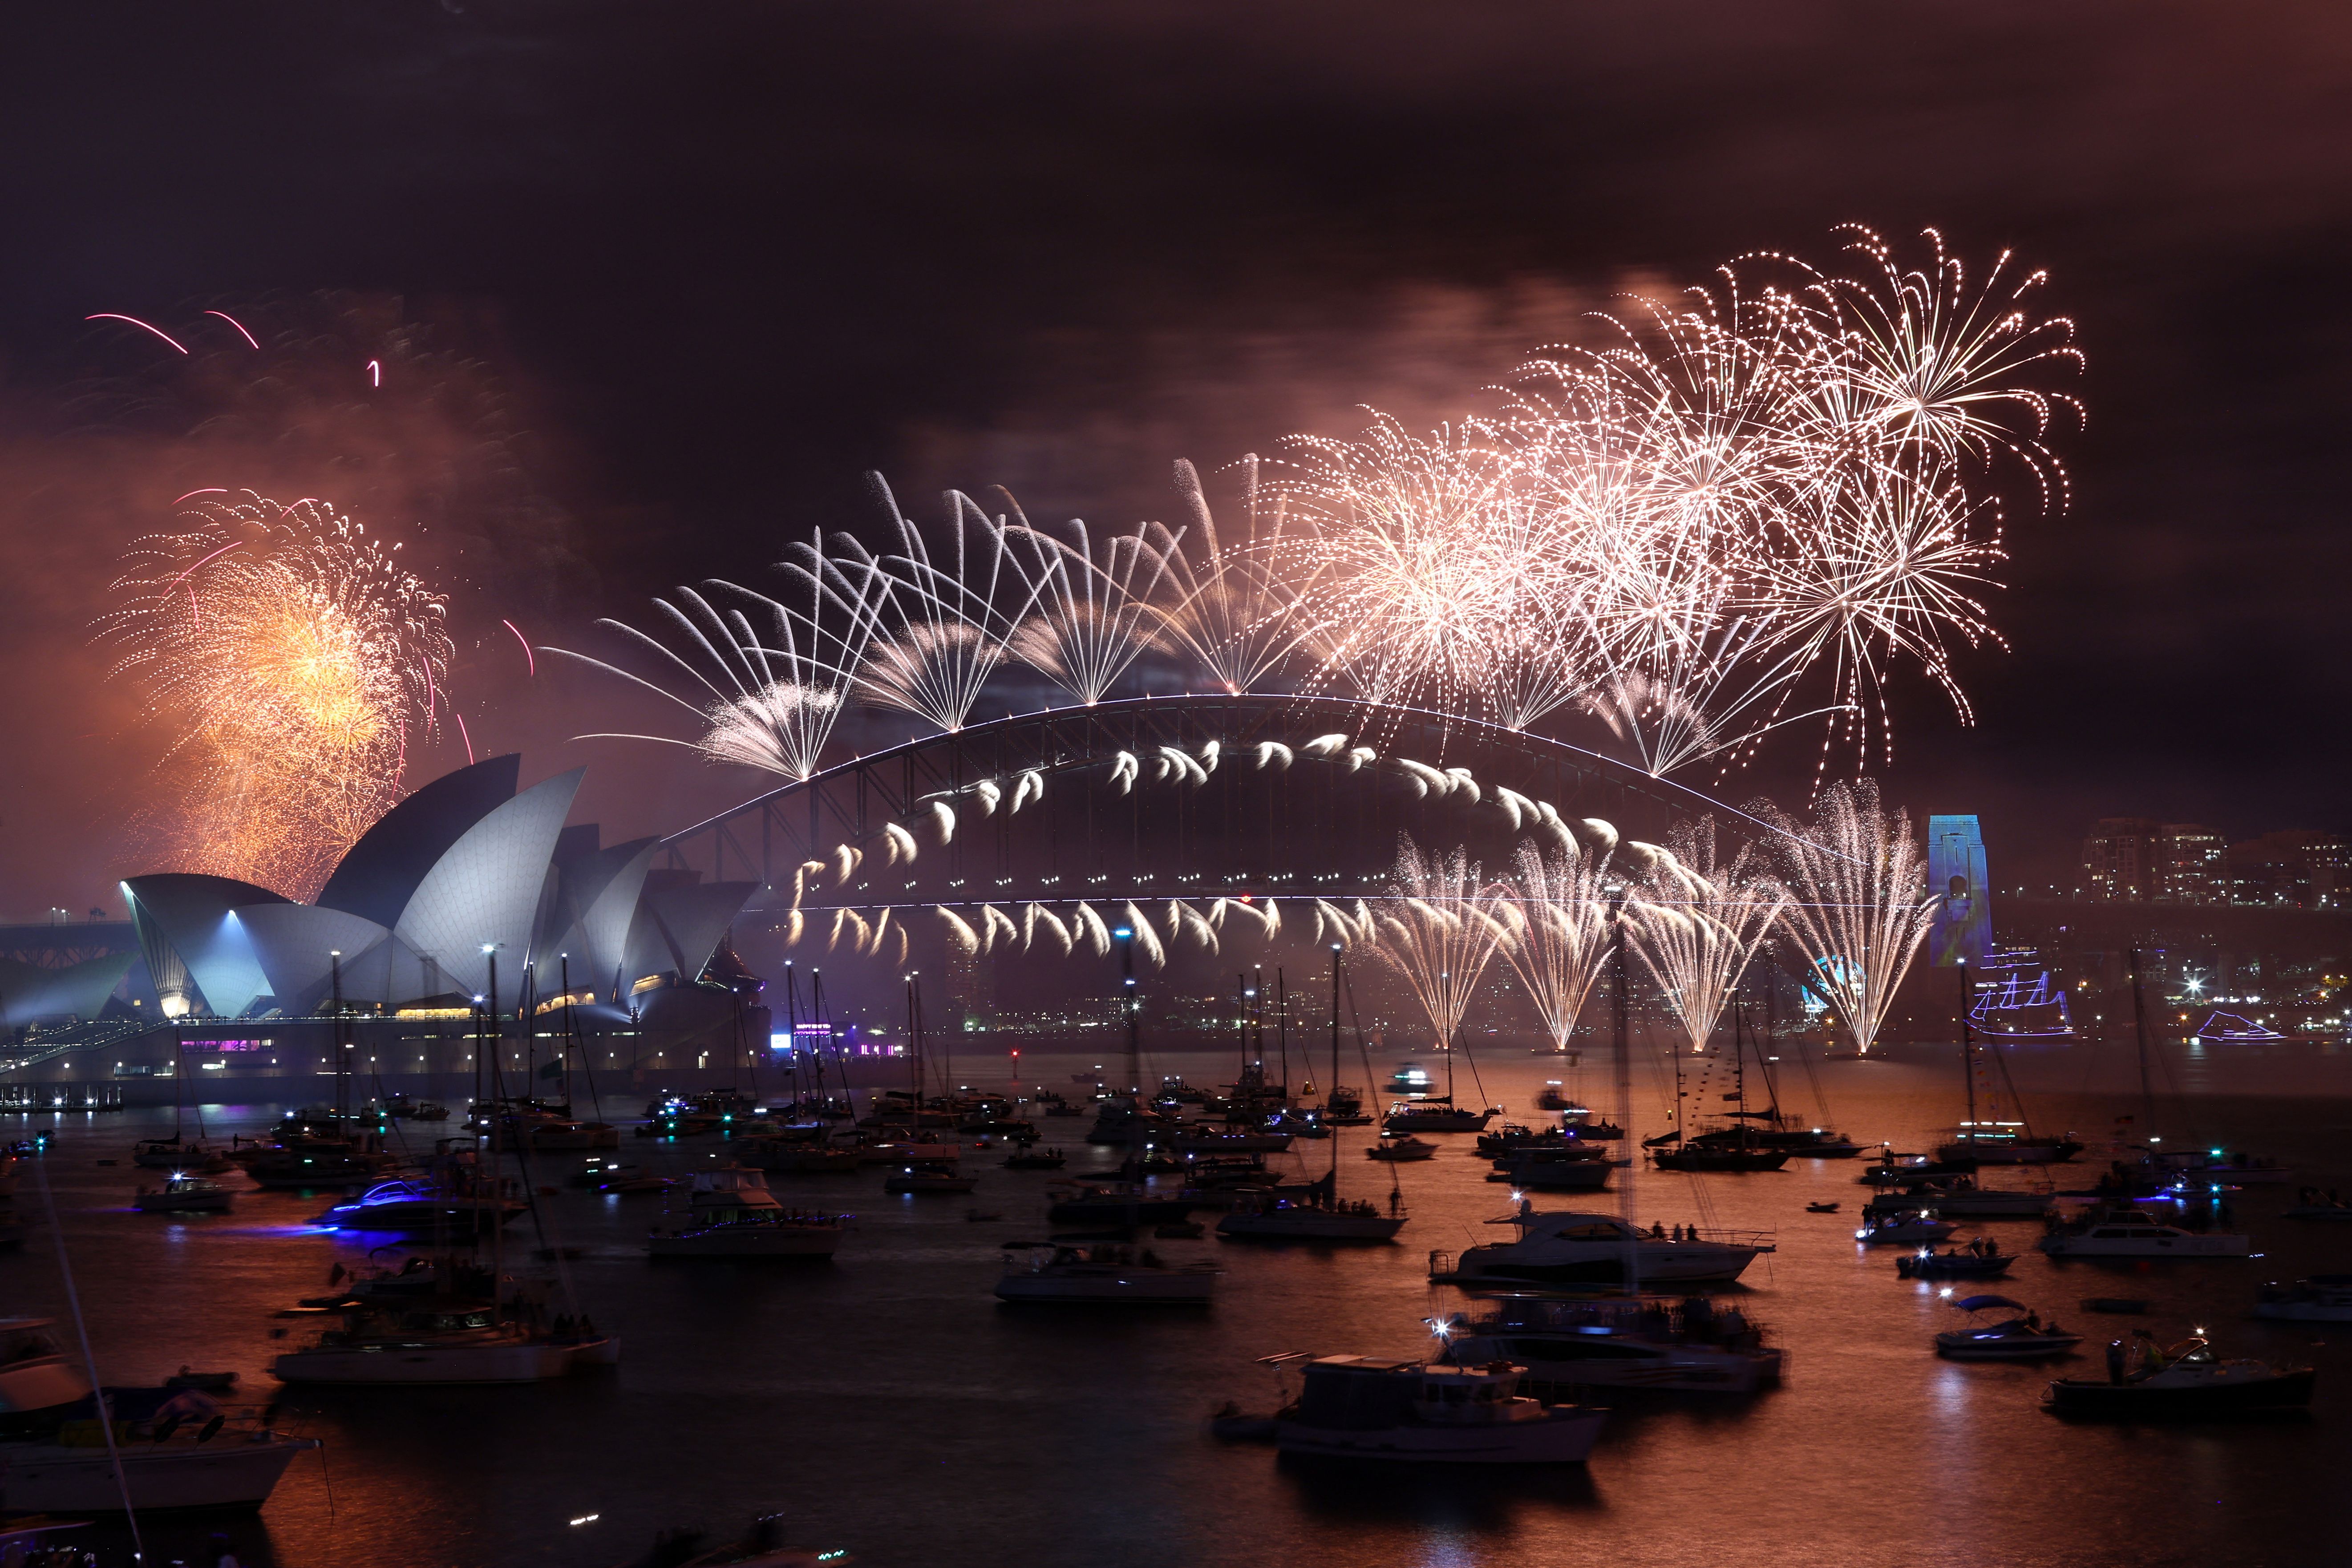 New Year's Eve fireworks light up the sky over the Sydney Opera House (L) and Harbour Bridge during the fireworks display in Sydney on January 1, 2023.